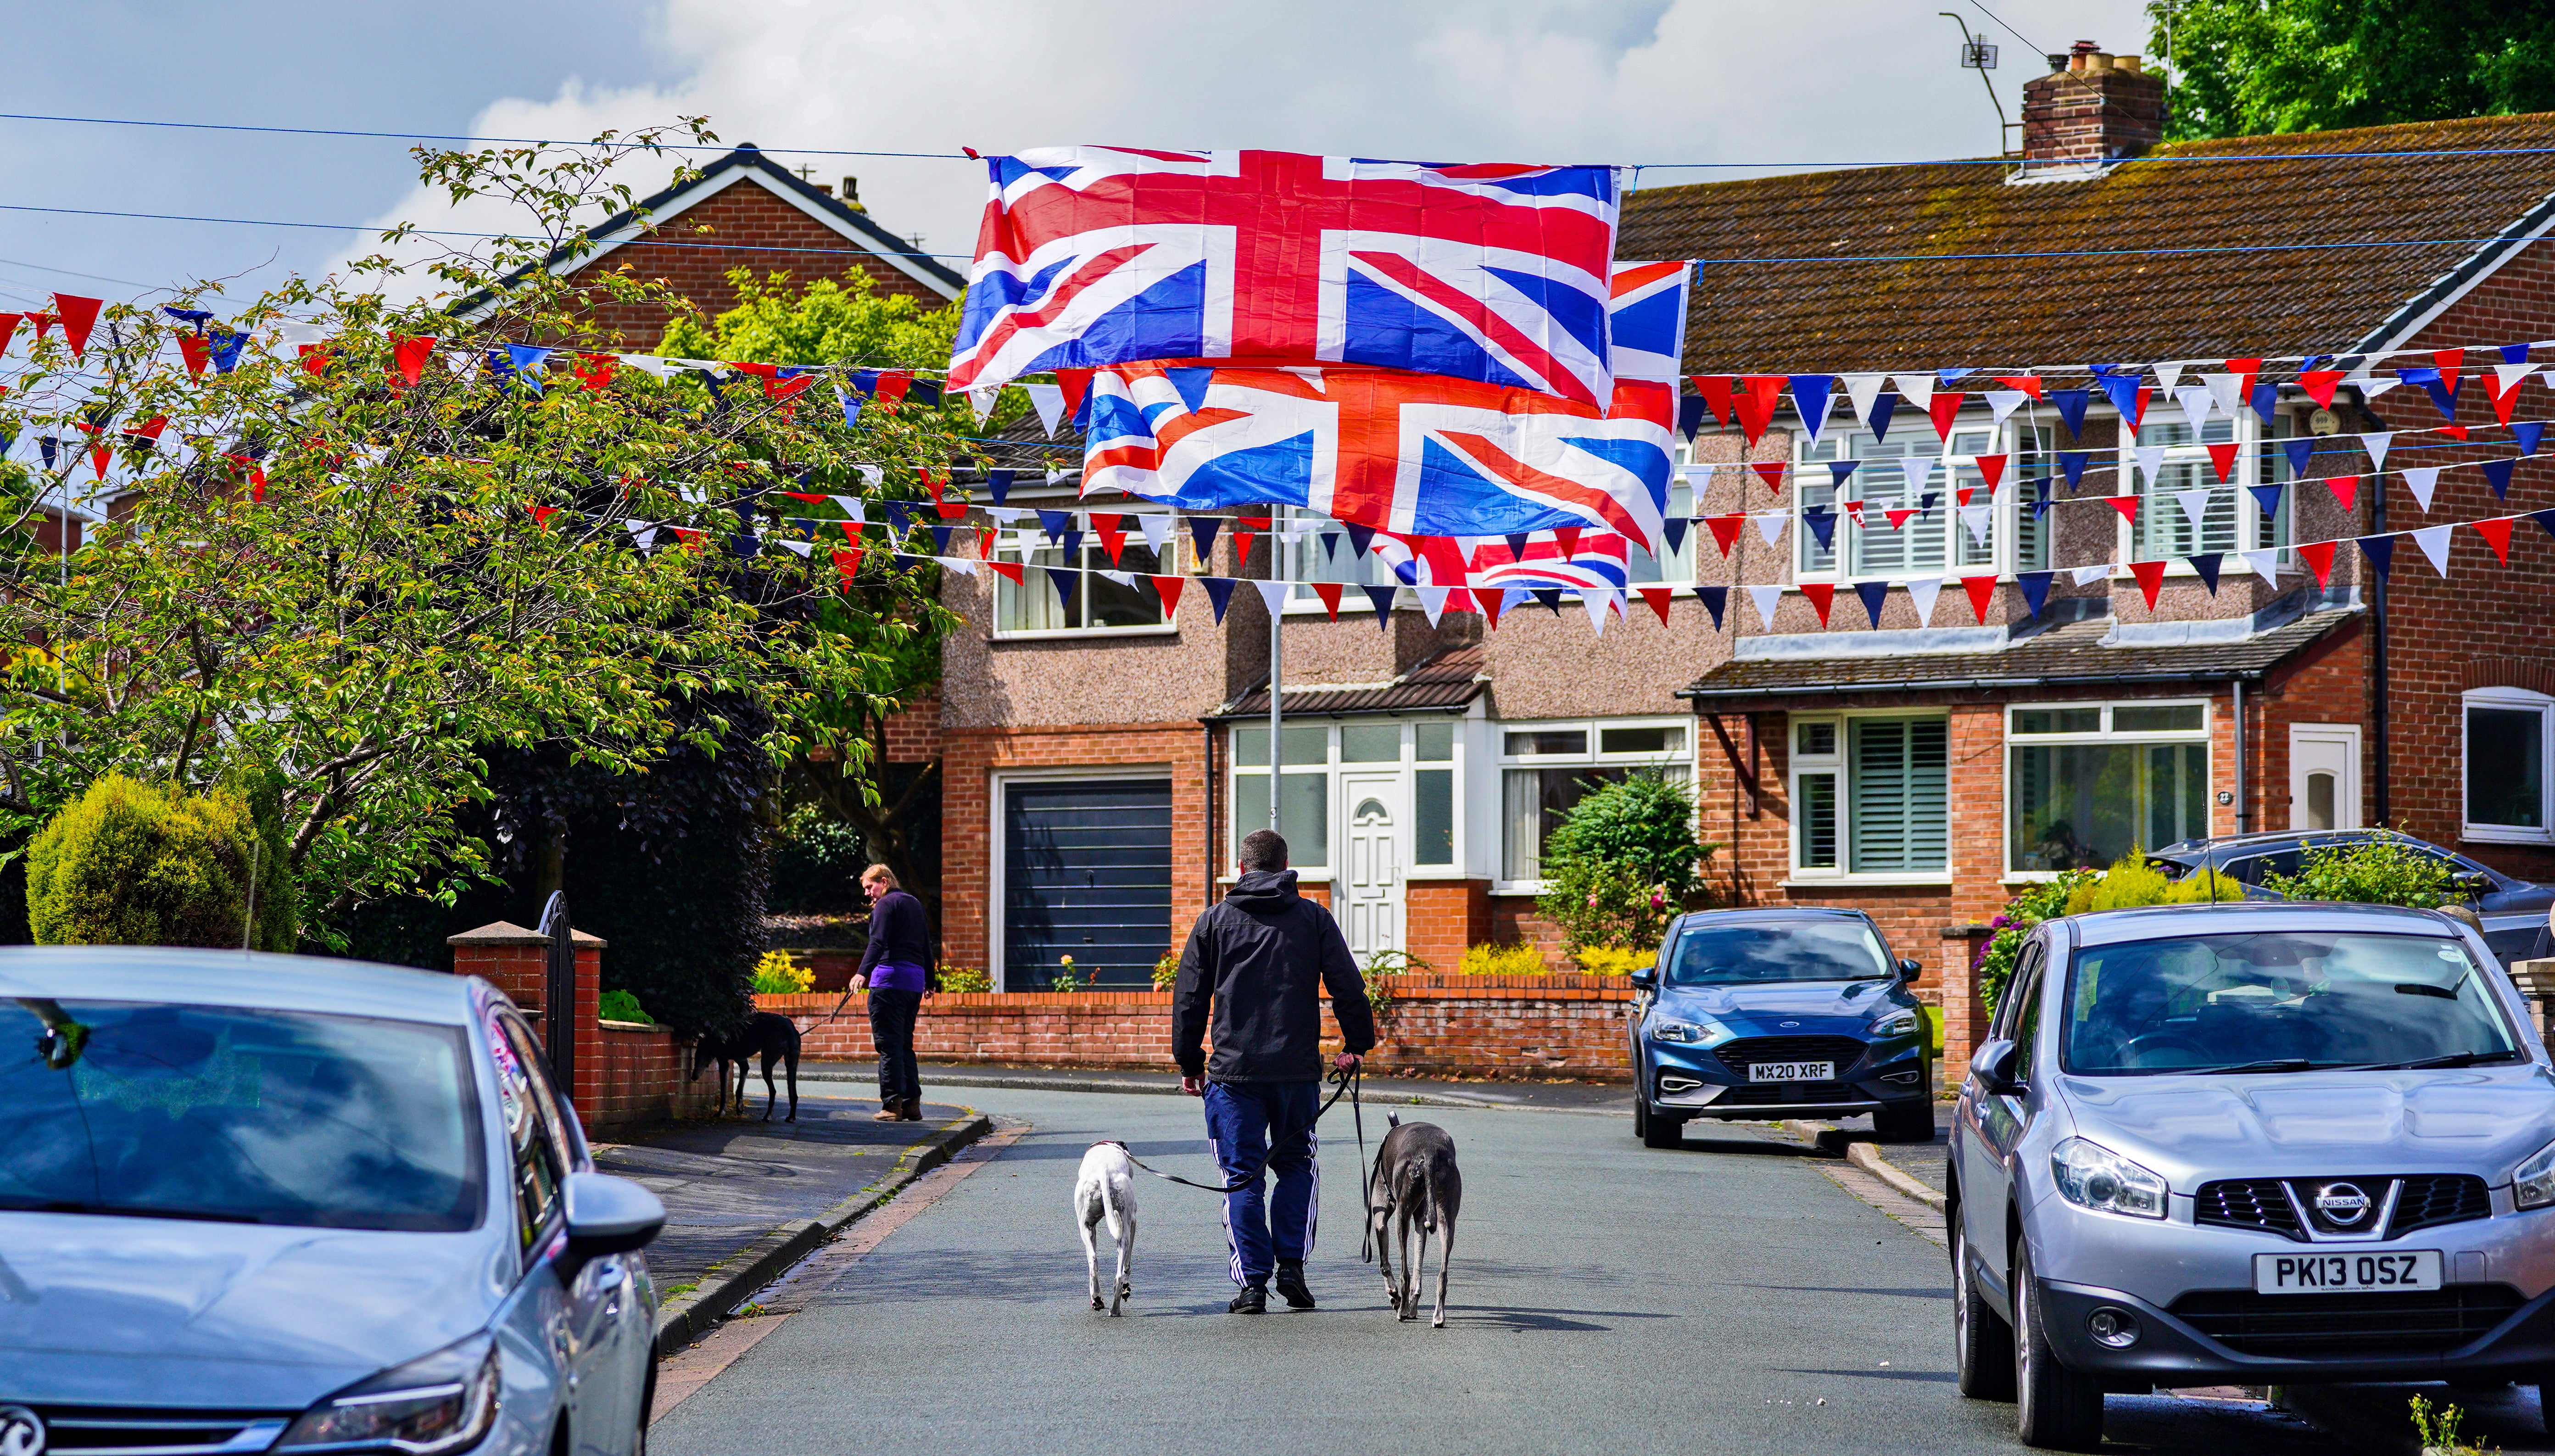 Fairlie Drive in Rainhill, Merseyside is decorated ahead of the Platinum Jubilee celebrations (PA)